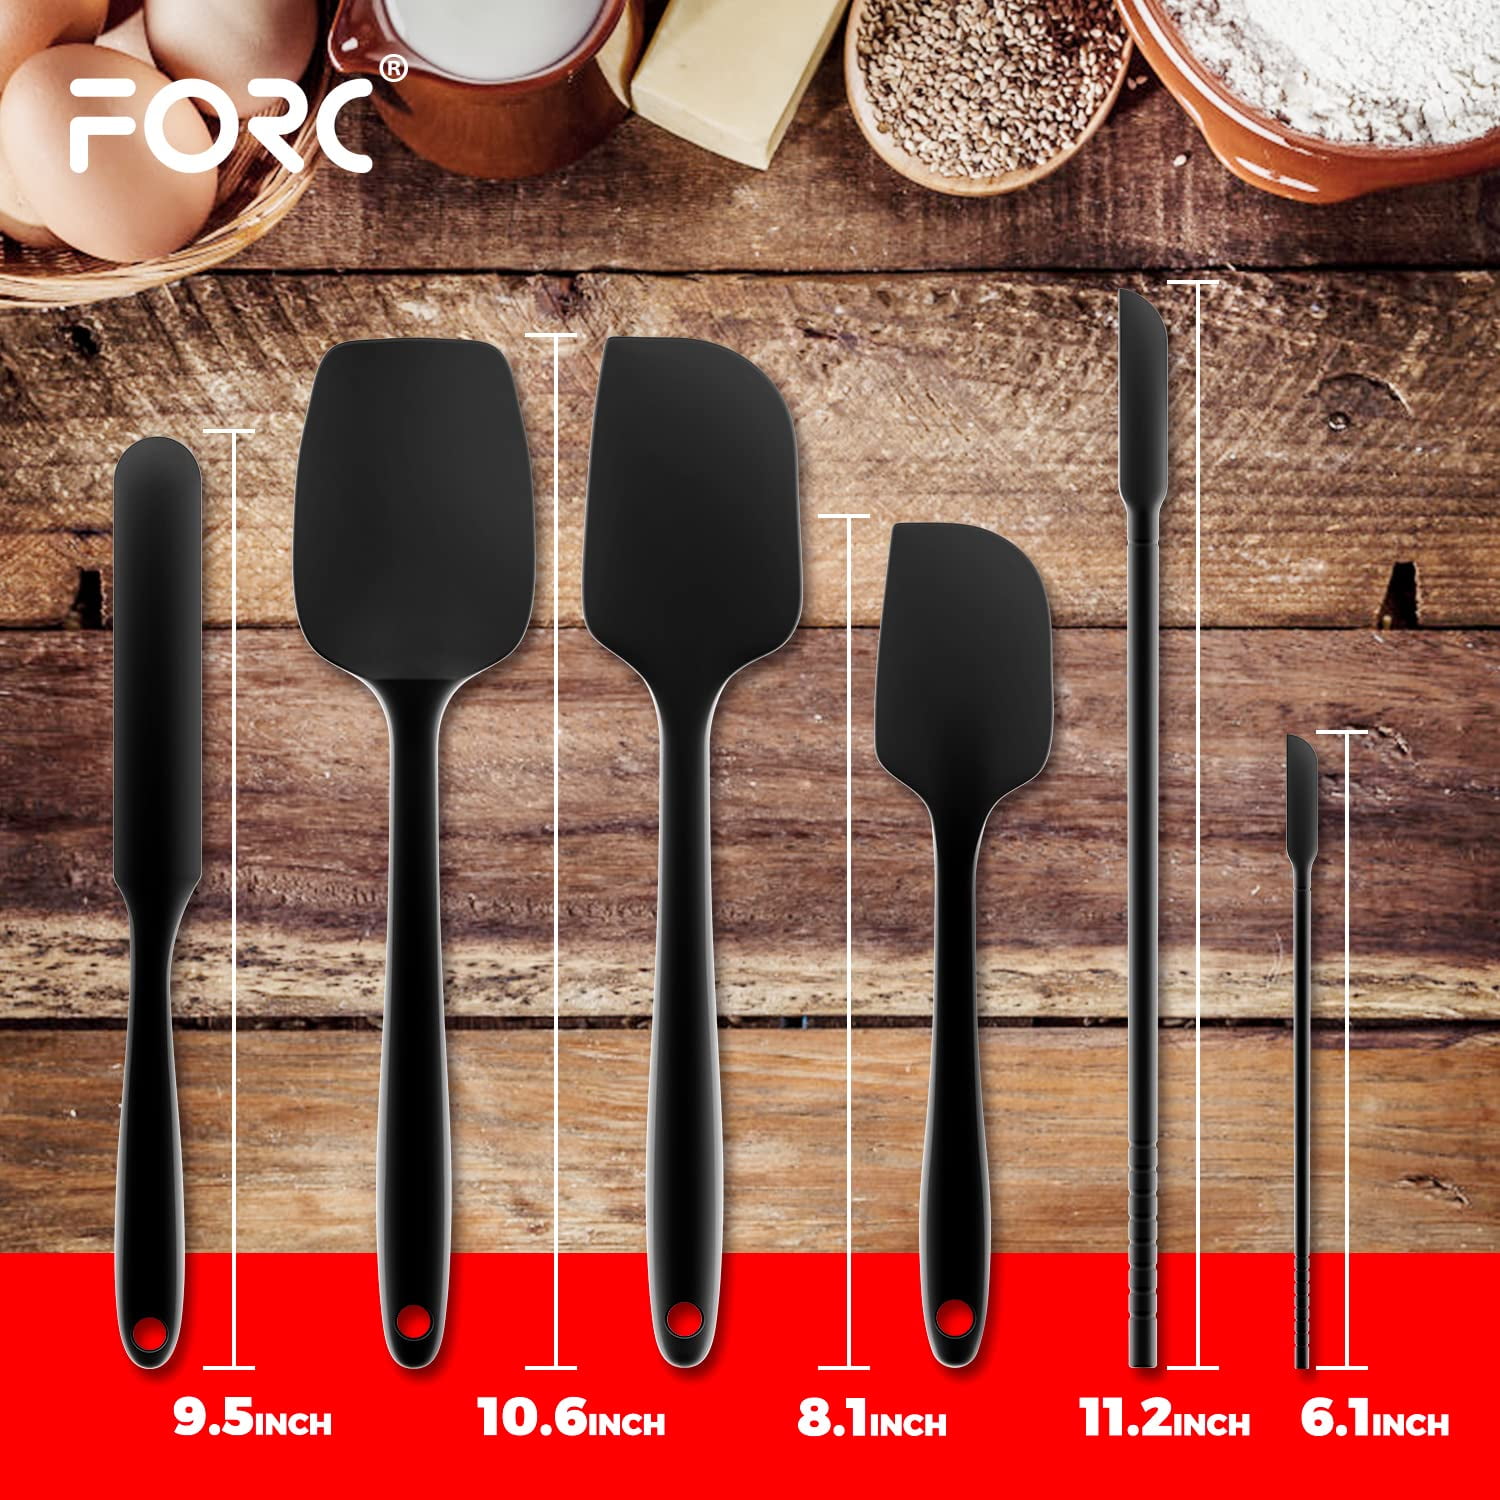  Silicone Spatulas, Small Rubber Spatula With Solid Stainless  Steel Core One Piece Design Heat Resistant Non-Stick Flexible Scrapers for  Mixing Cooking Baking（5 piece）: Home & Kitchen